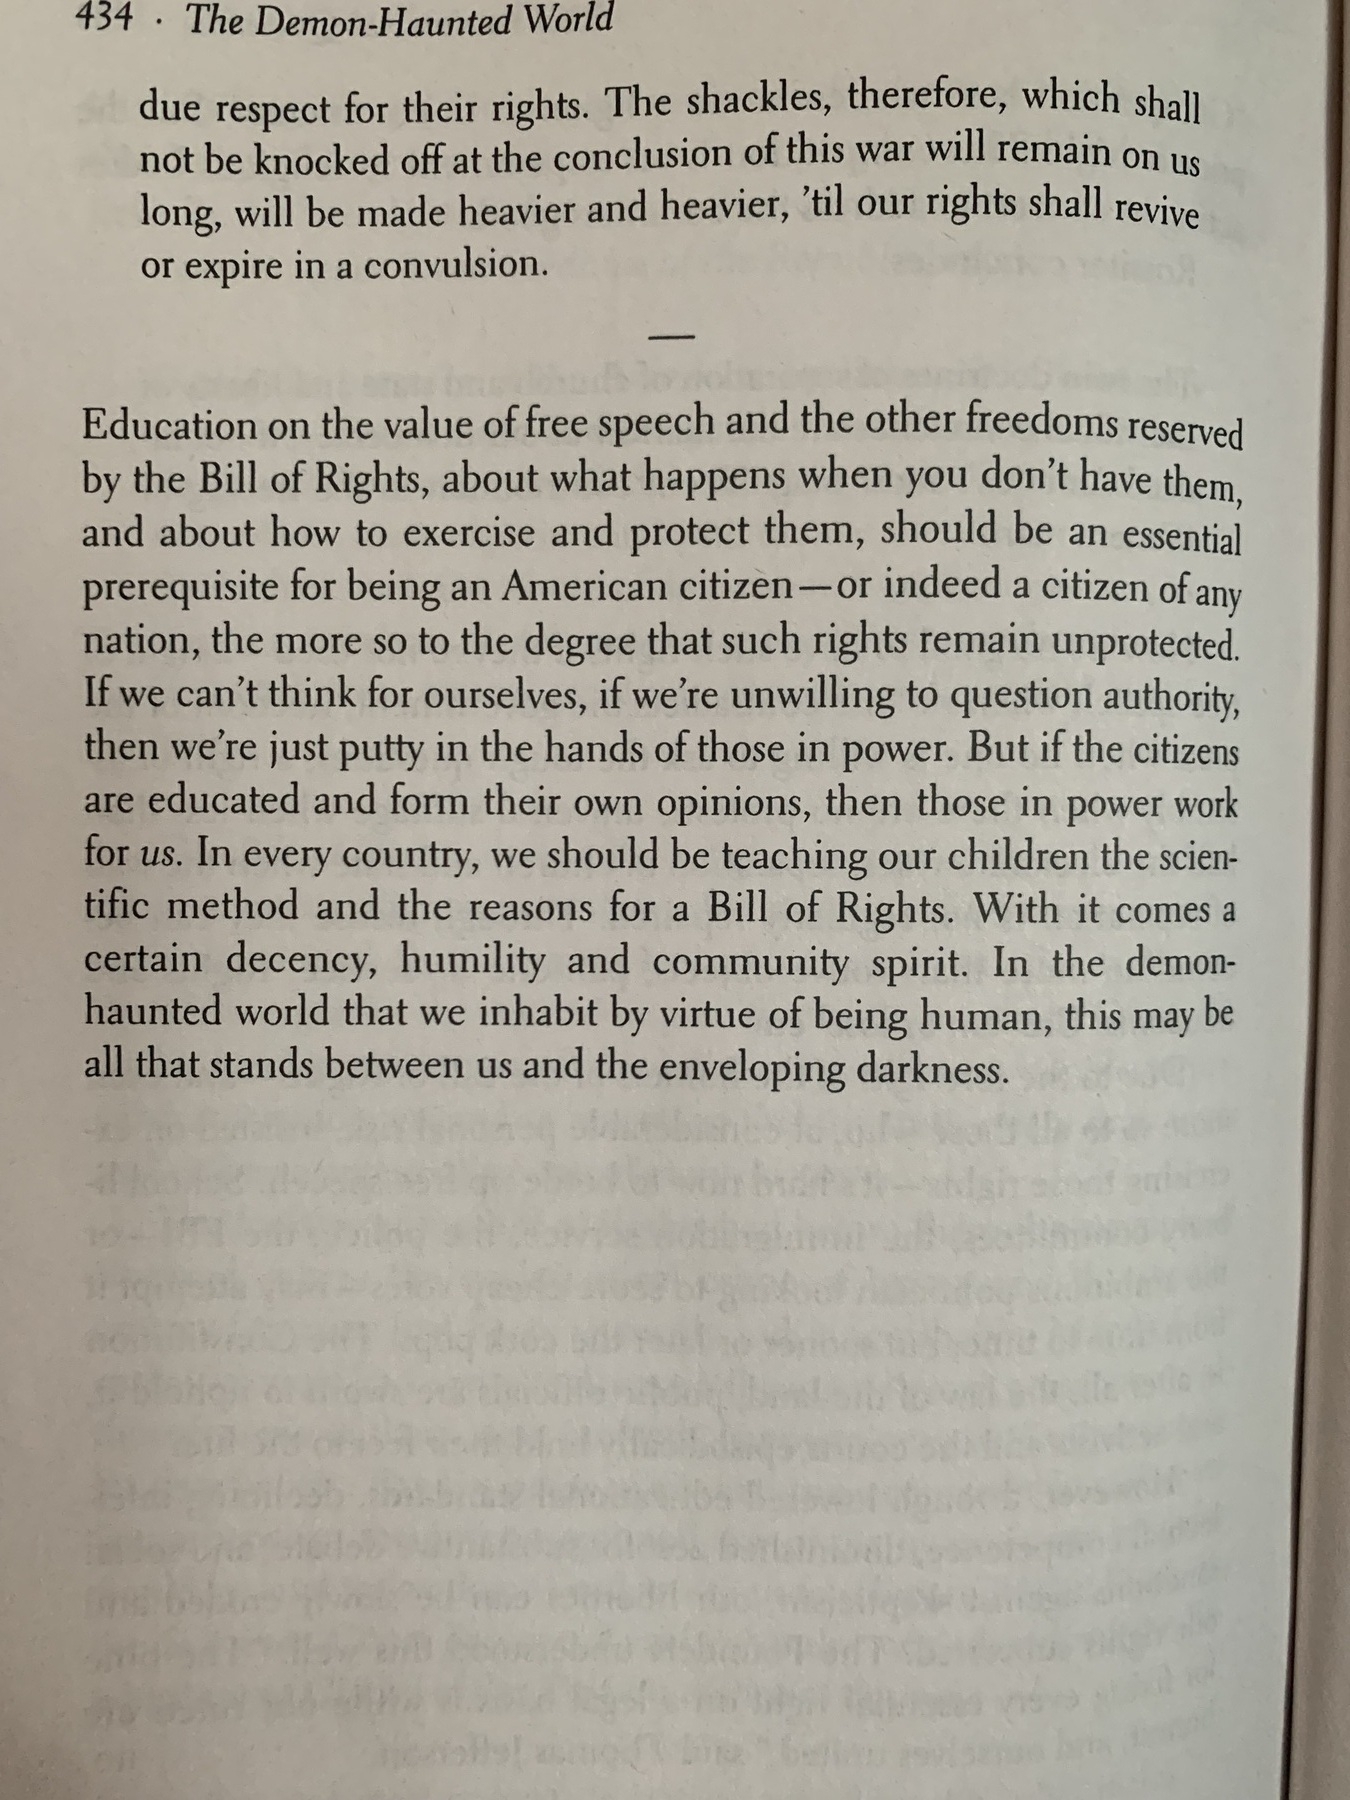 Photo of page 434 from the book The Demon-Haunted World by Carl Sagan. It talks about the importance of freedom of speech and the scientific method.